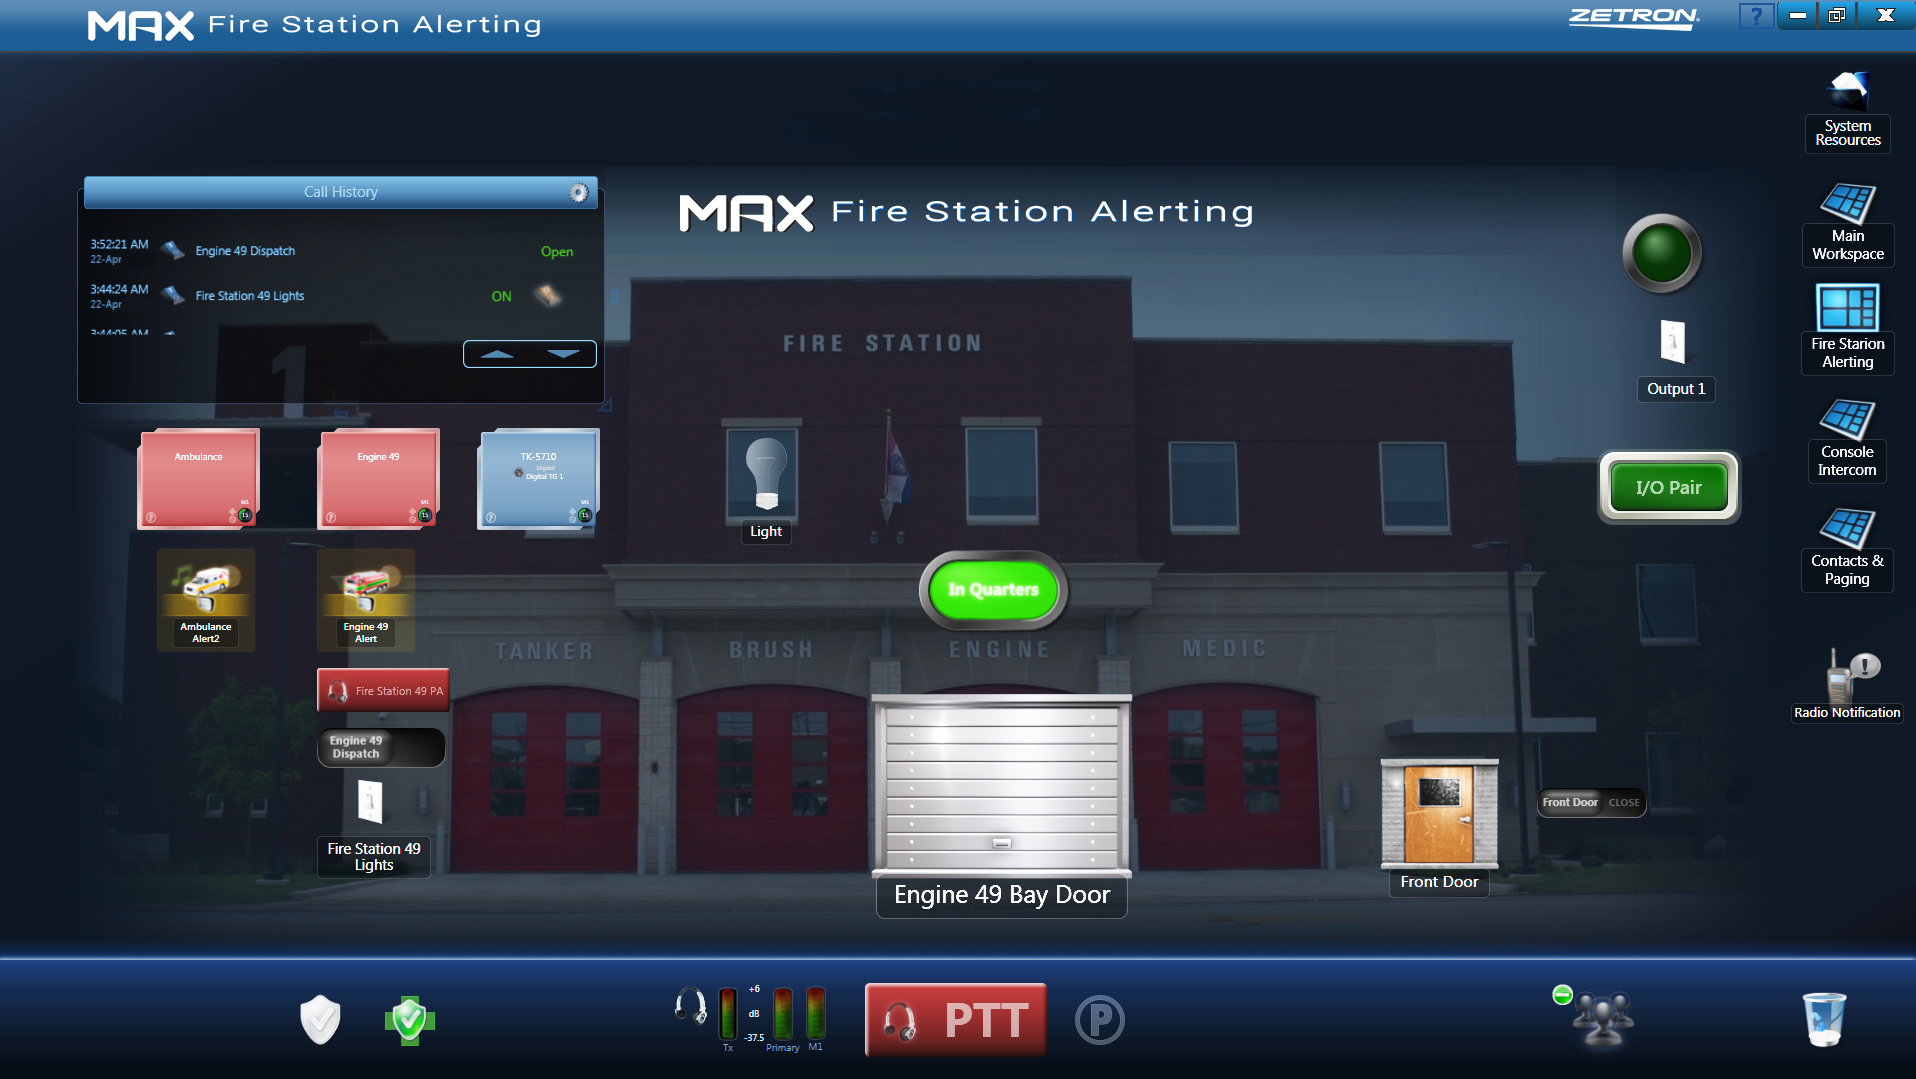 Zetron Launches New MAX Fire Station Alerting Solution to Improve